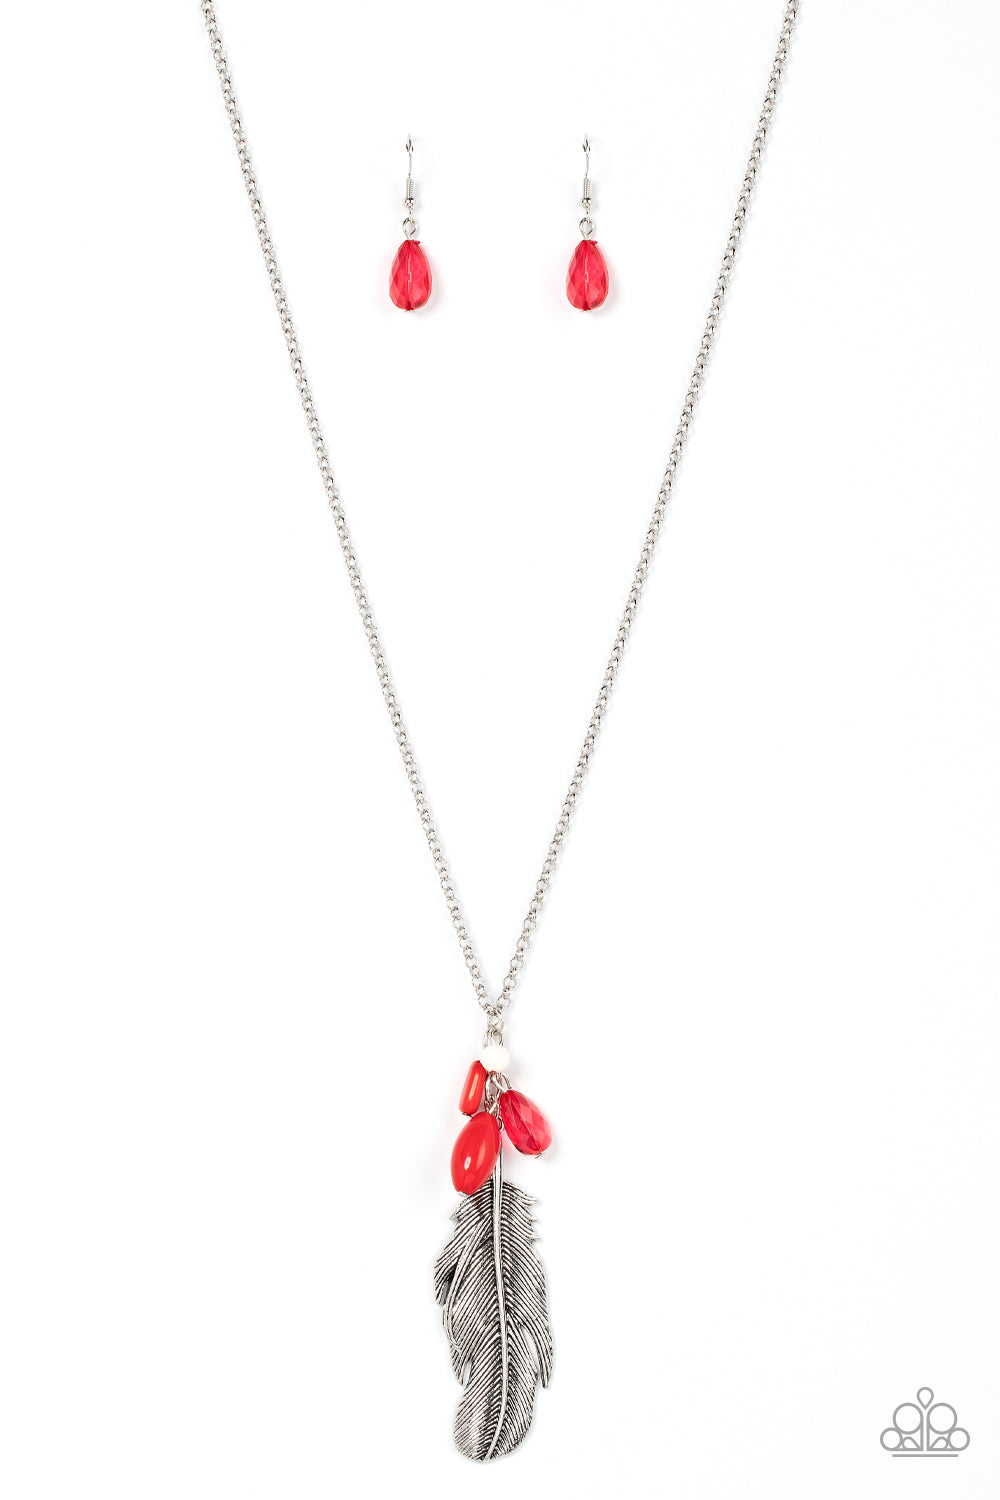 Off the FLOCK - Red & White Beads/Oversized Silver Feather Pendant Paparazzi Necklace & matching earrings